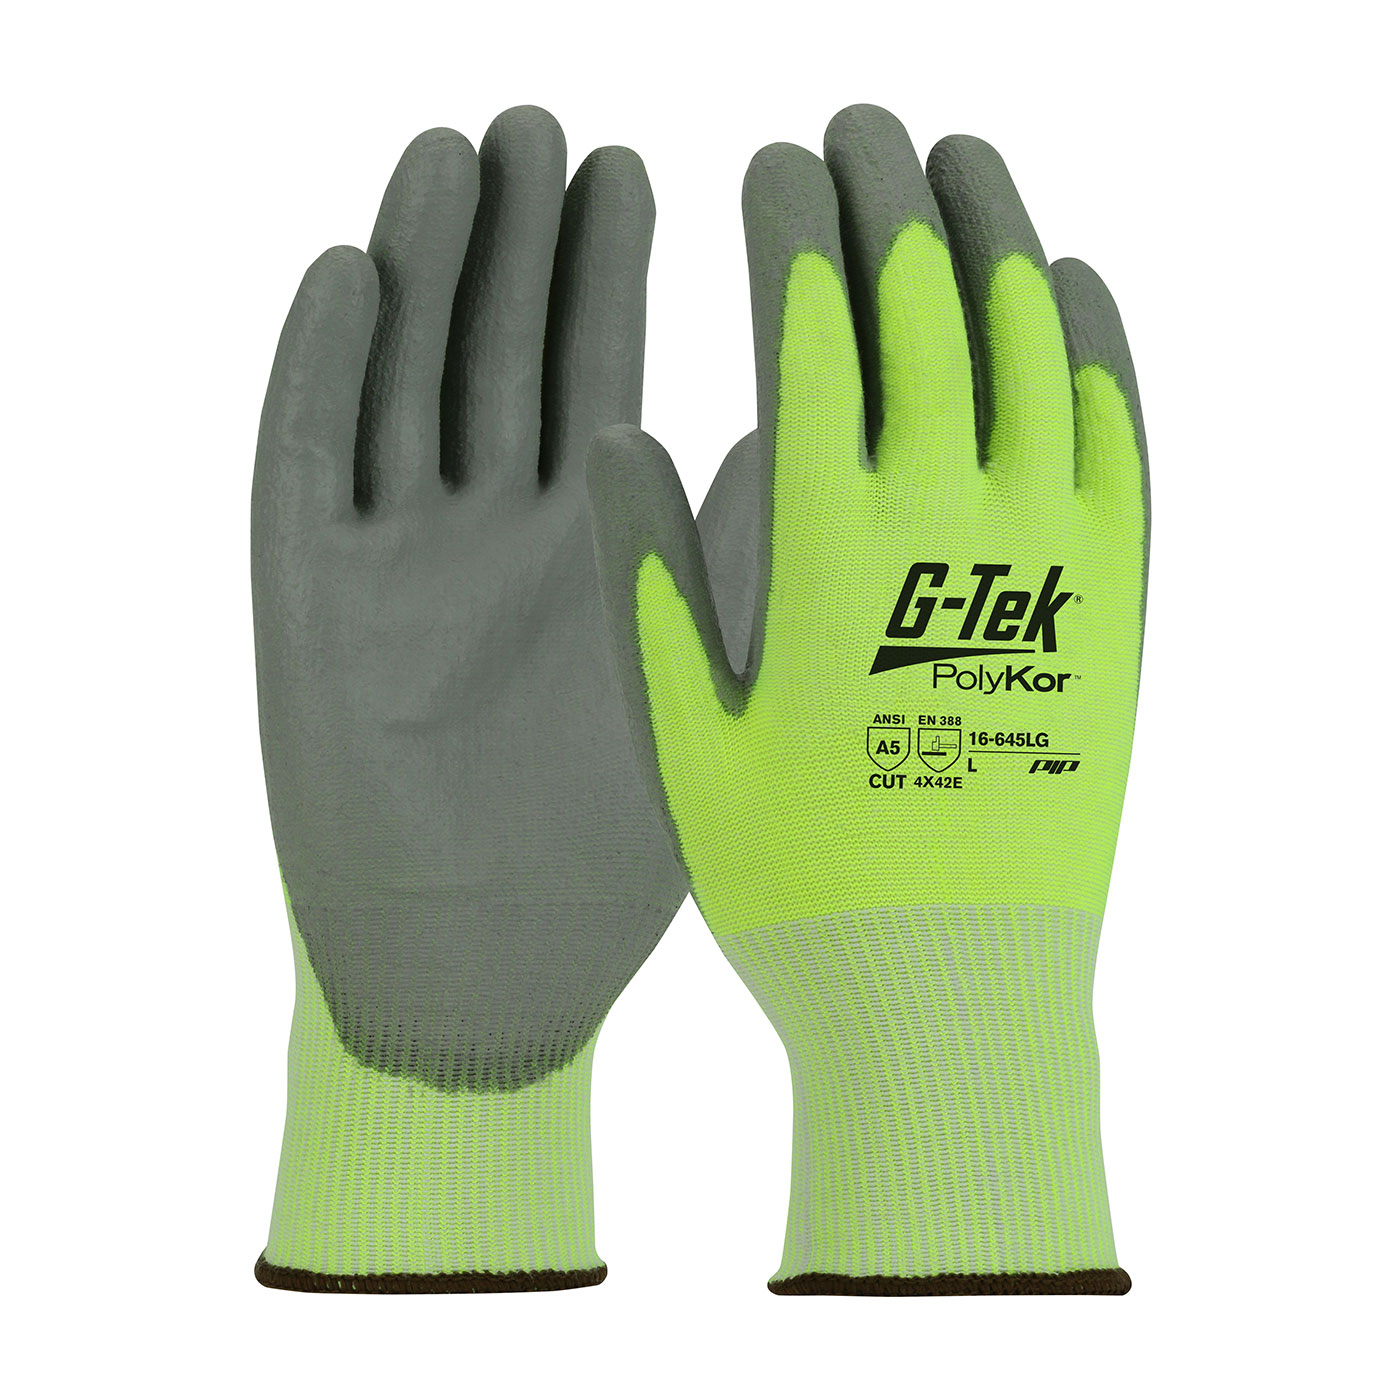 PIP 16-645LG/XL G-Tek PolyKor Seamless Knit PolyKor Blended Glove with Polyurethane Coated Smooth Grip on Palm & Fingers - X-Large PID-16645LGXL